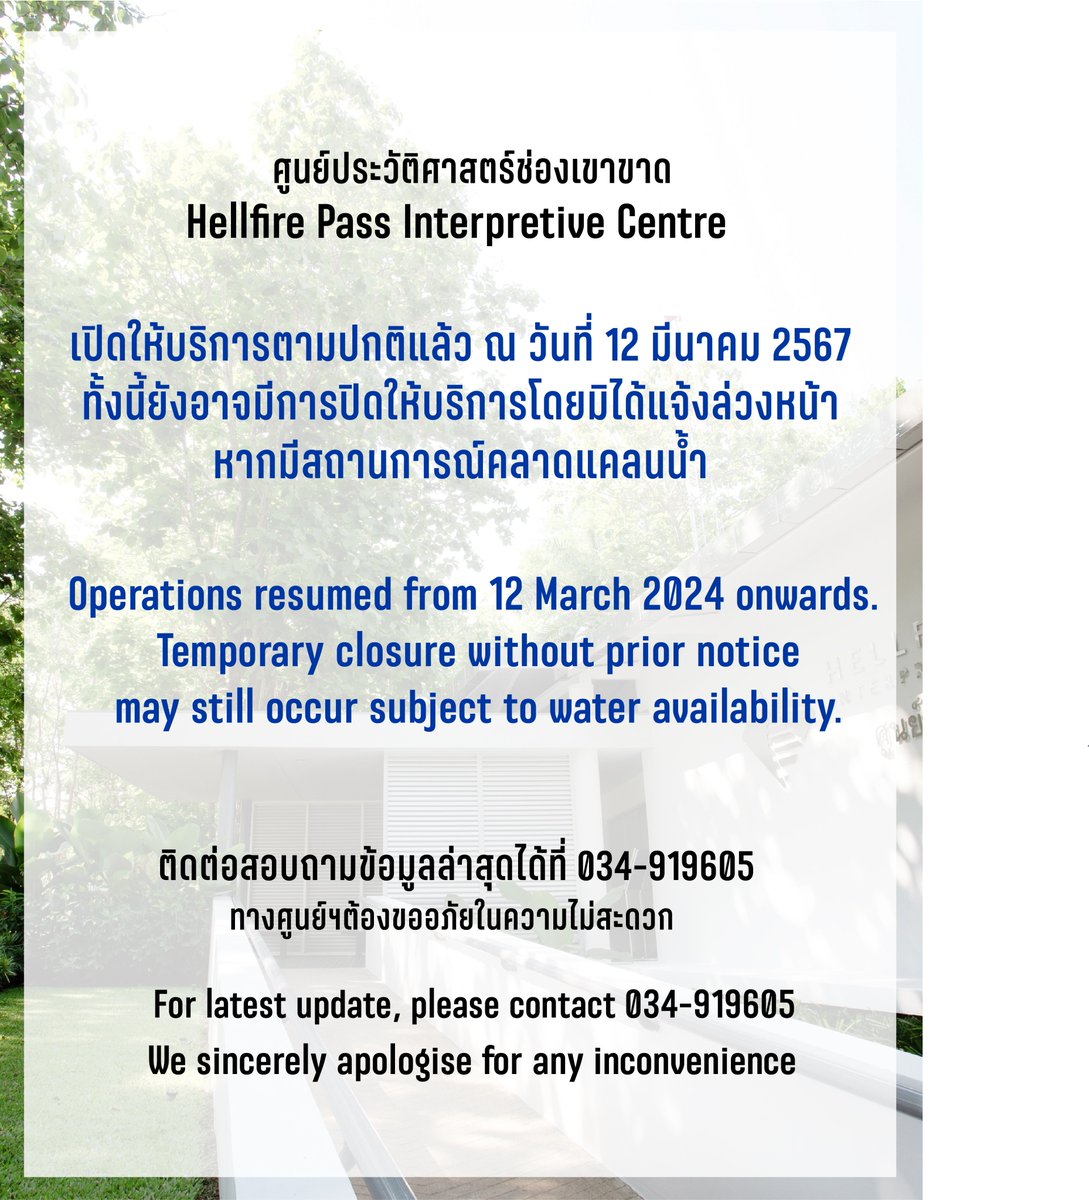 We have resumed our operations today. However temporary closure may still occur. Please contact us for latest update and information #HellfirePass #Kanchanaburi #BurmaThaiRailway #ช่องเขาขาด